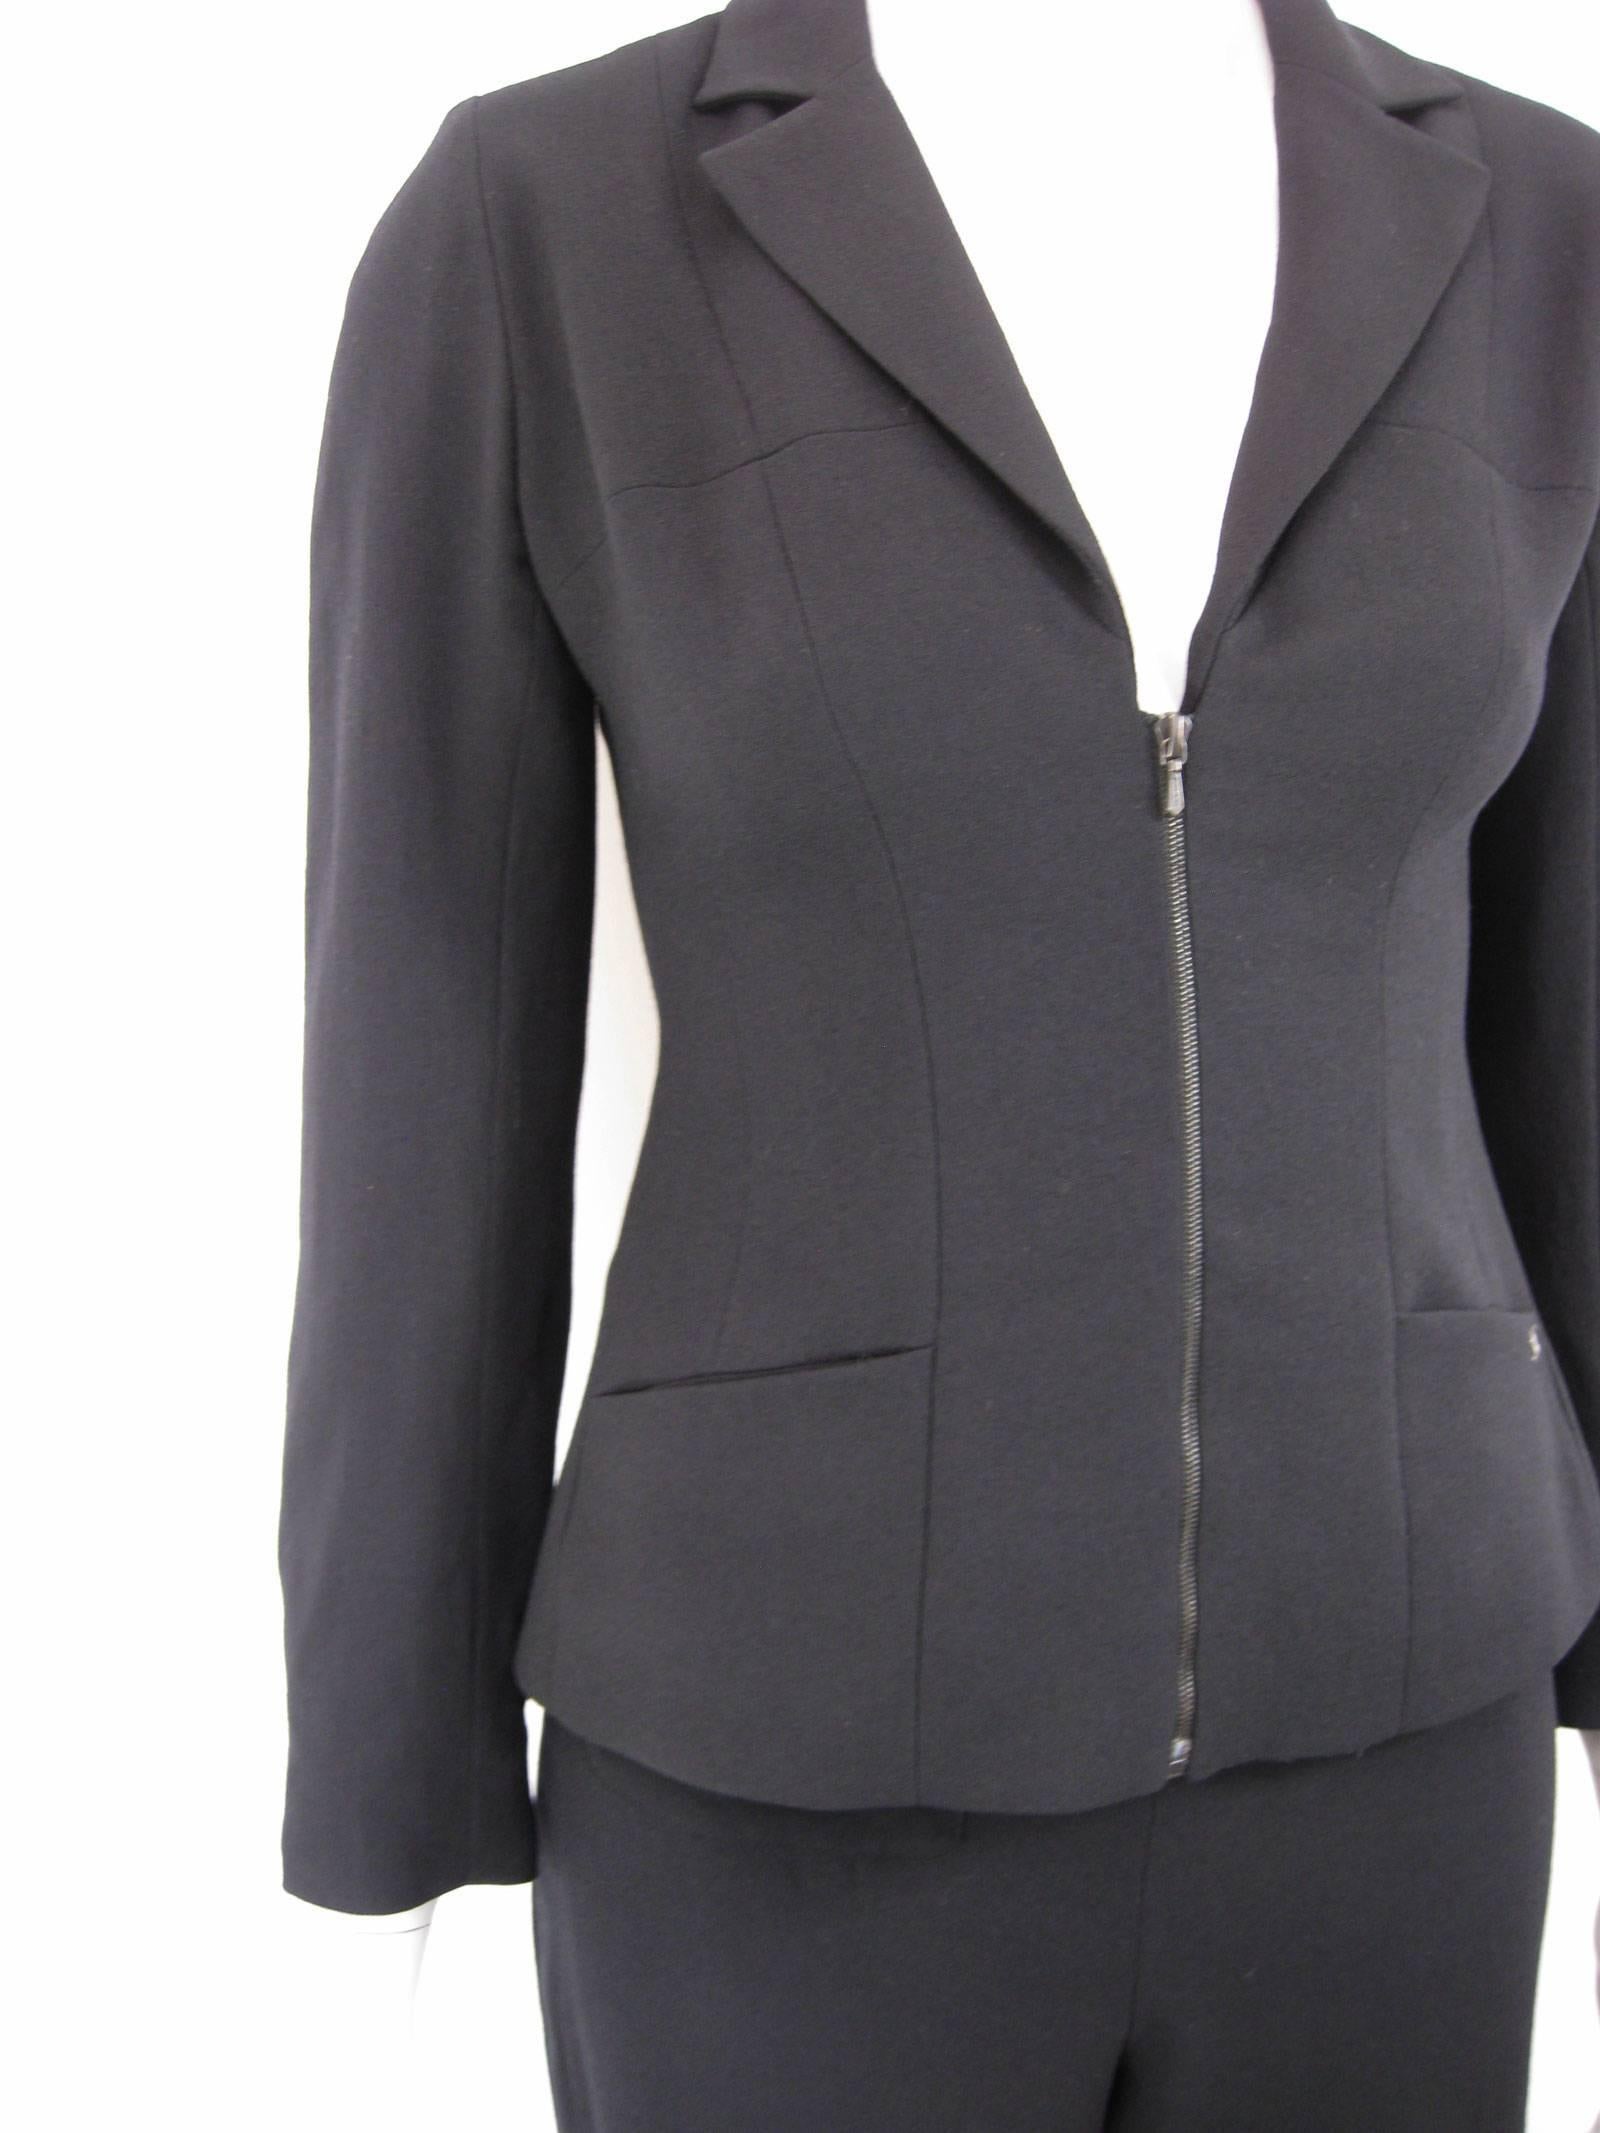 Chanel Classic Lightweight Black Wool Pant Suit 2